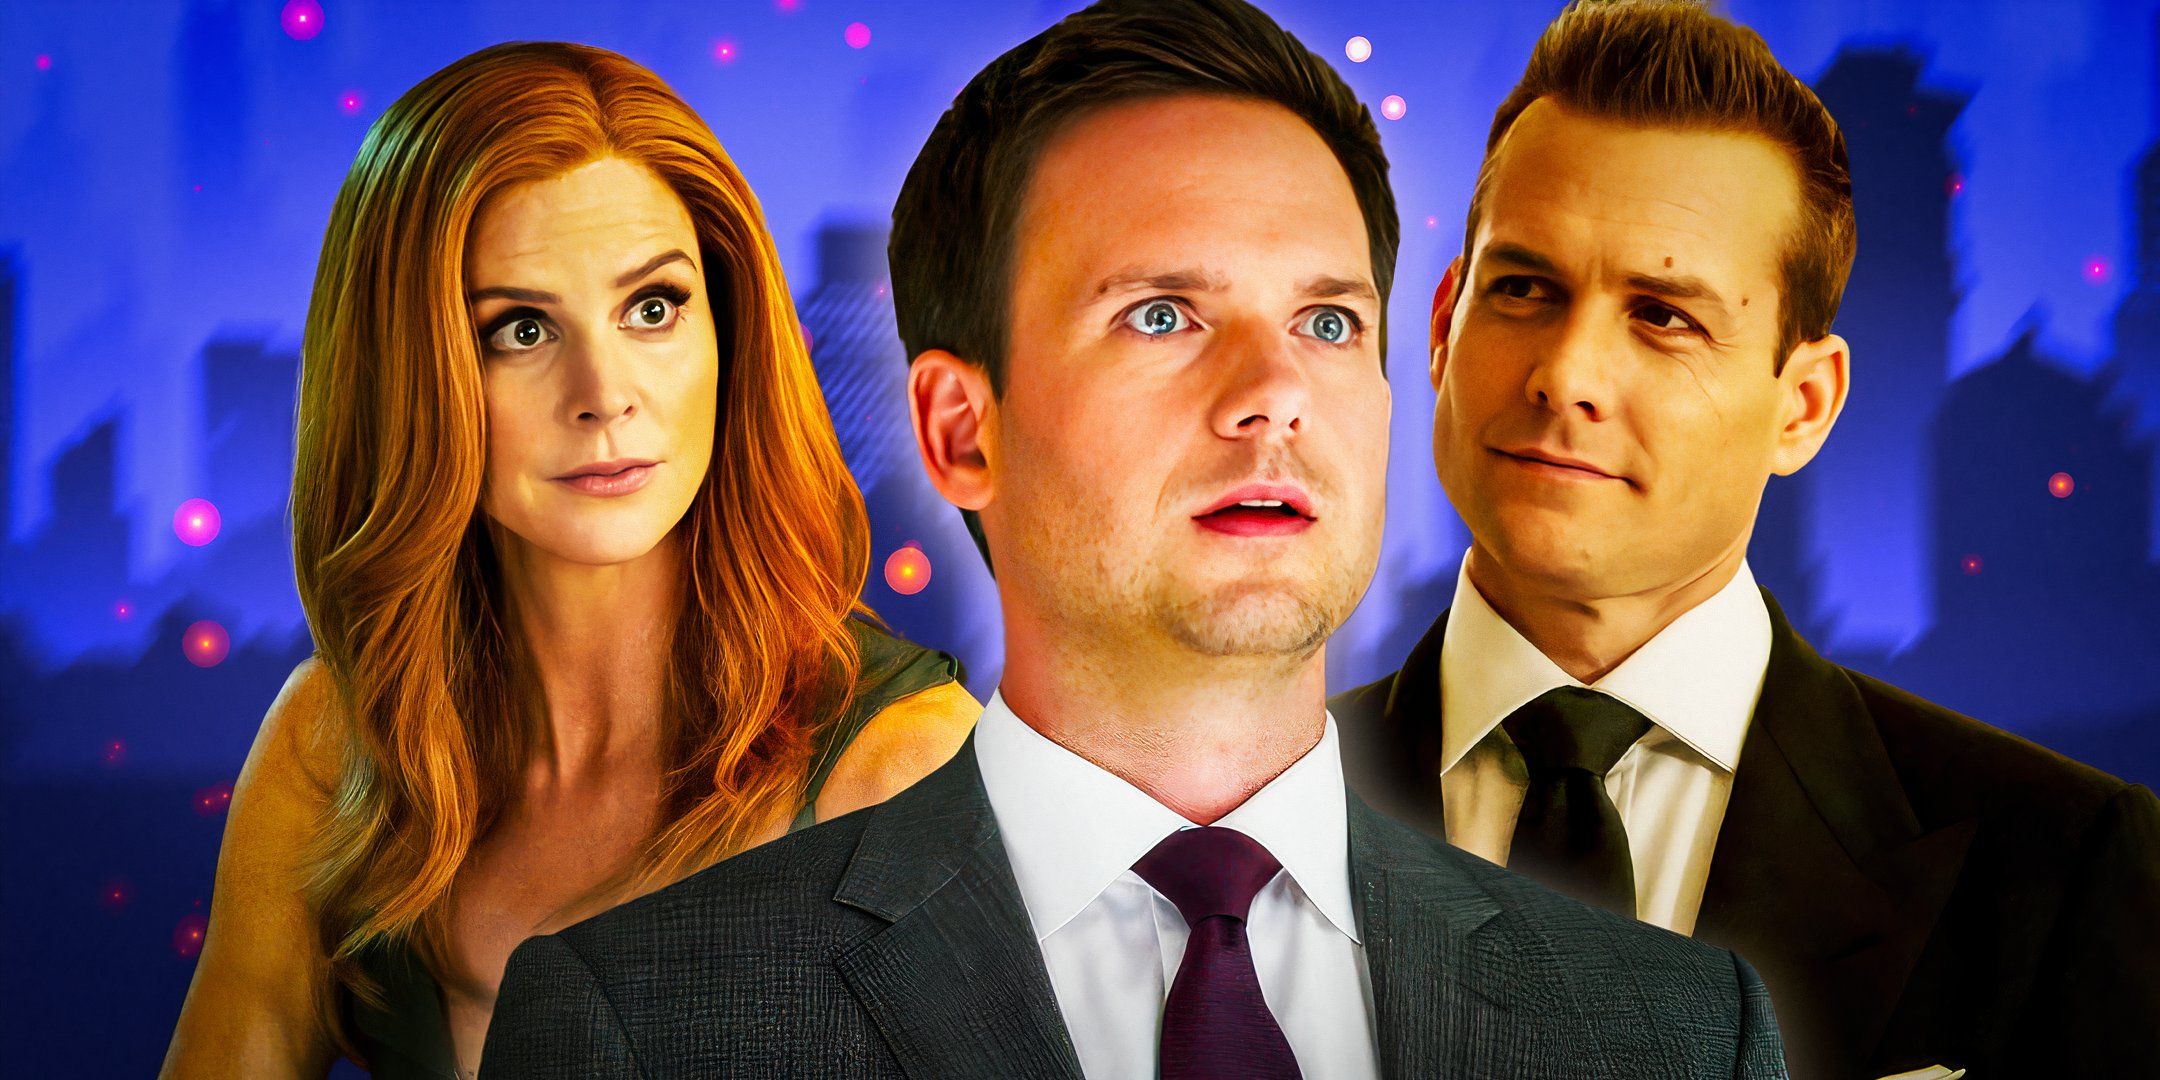 Patrick J Adams as Mike, Sarah Rafferty as Donna, and Gabriel Macht as Harvey in Suits.